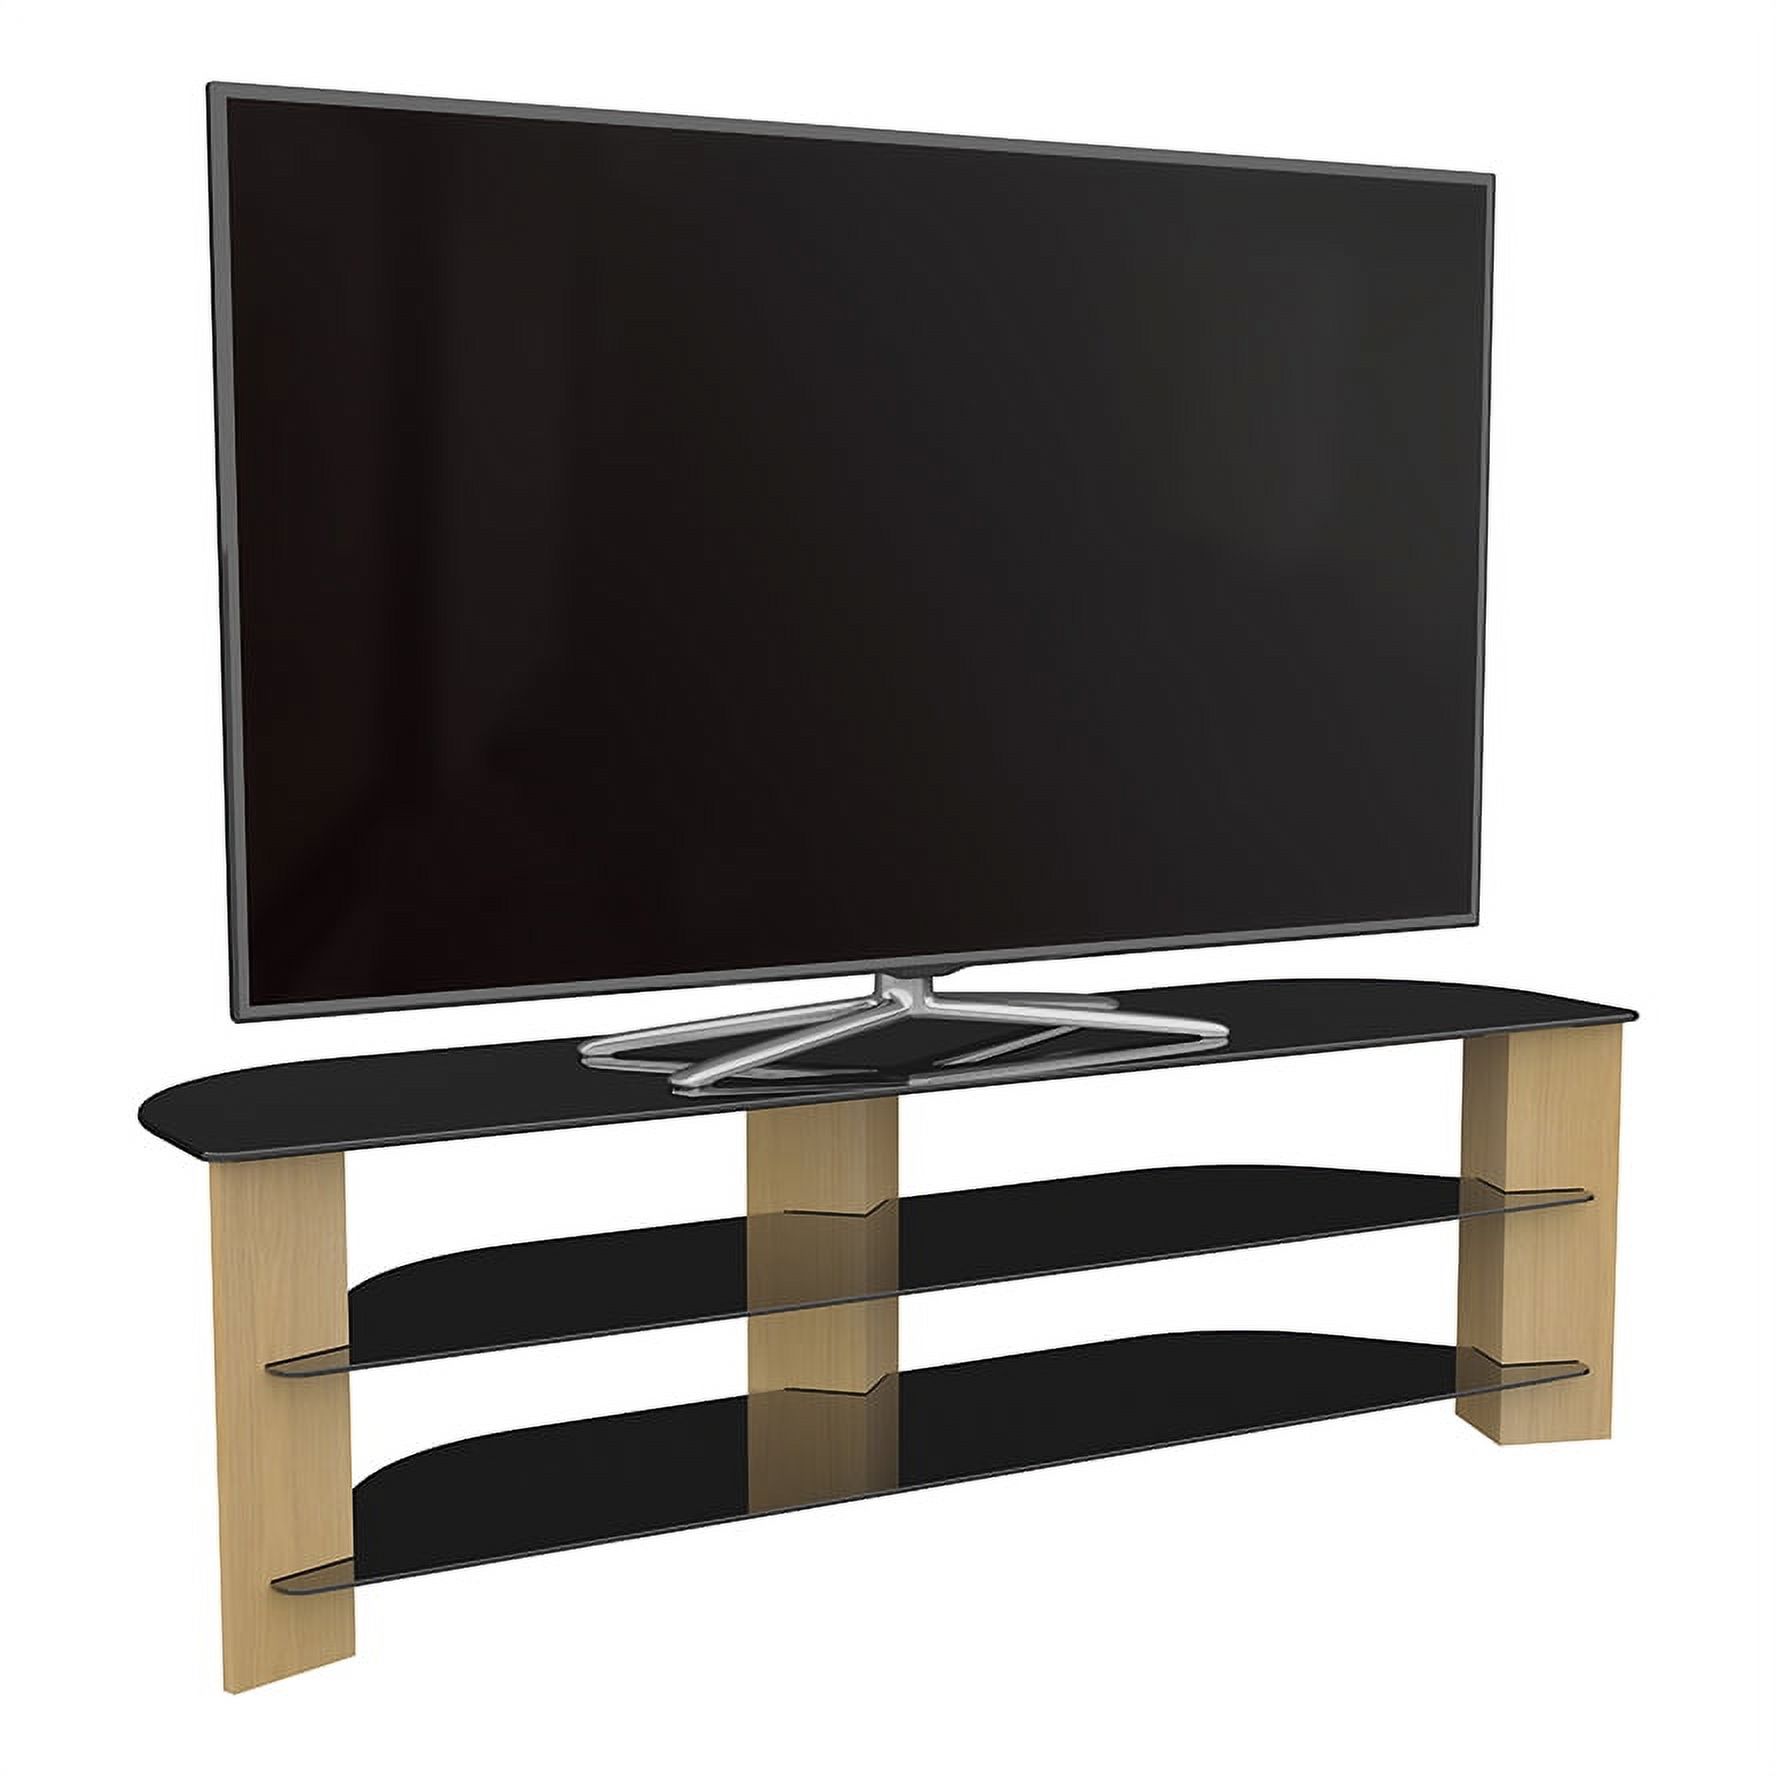 AVF FS1500VAROB-A Varano TV Stand with Light Oak Legs and Black Tempered Glass Shelves for many TVs up to 70 inch. For TVs with wide feet, please measure to assure fit on this stand. - image 4 of 5